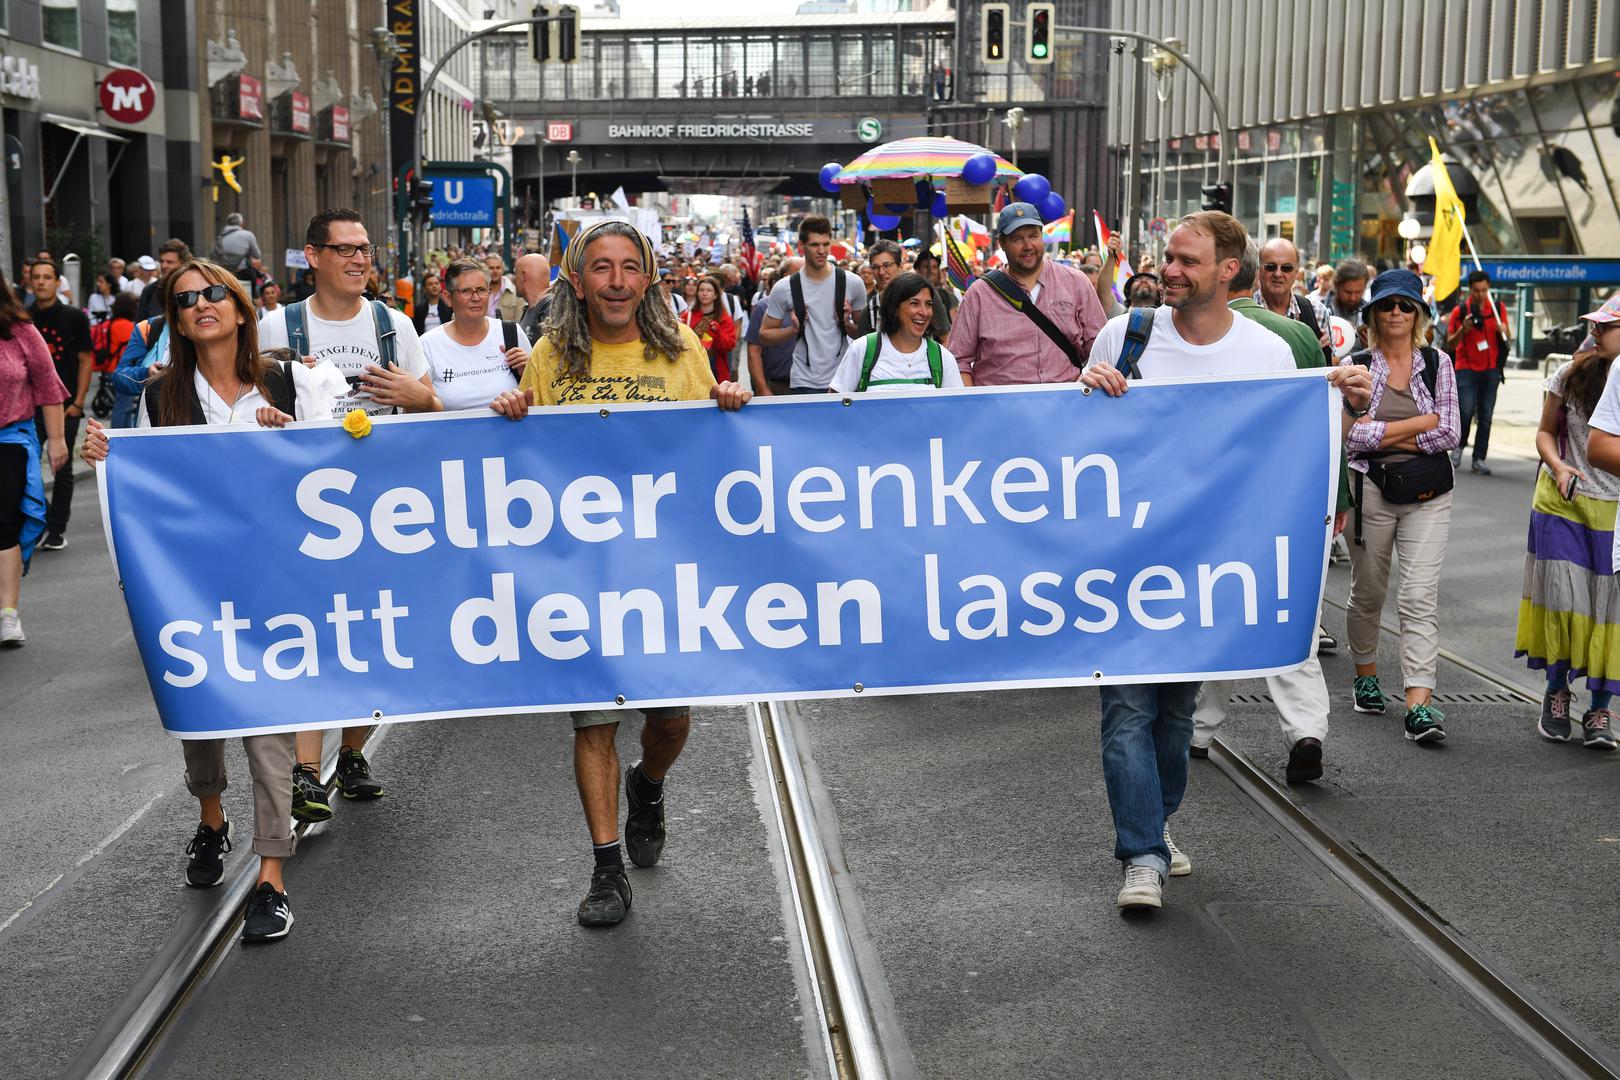 29 August 2020, Berlin: Participants walk through Freidrichstraße during a demonstration against the Corona measures with a banner "Think for yourself, don't let others think! Photo: Bernd Von Jutrczenka/dpa /DPA/PIXSELL